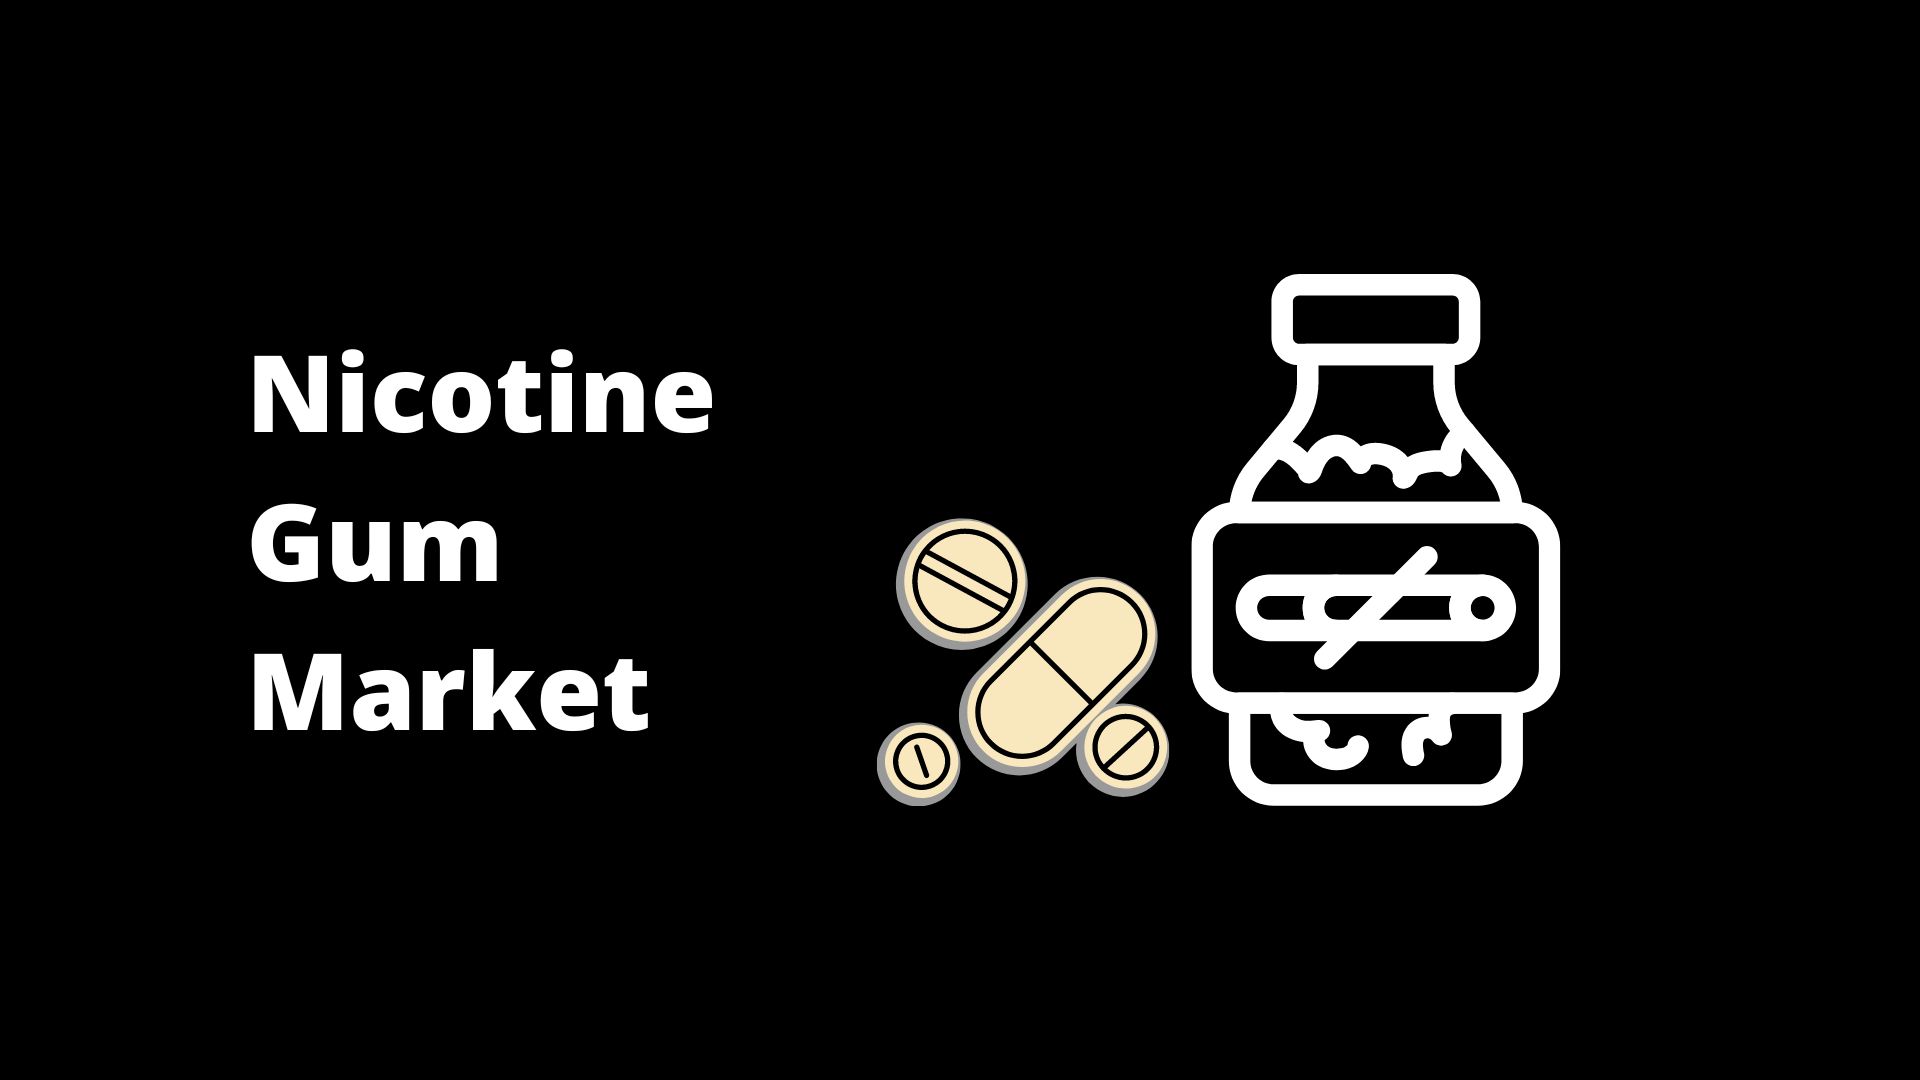 Nicotine Gum Market Growth (USD 2.4 billion by 2032 at 5.1% CAGR) Global Analysis by Market.us